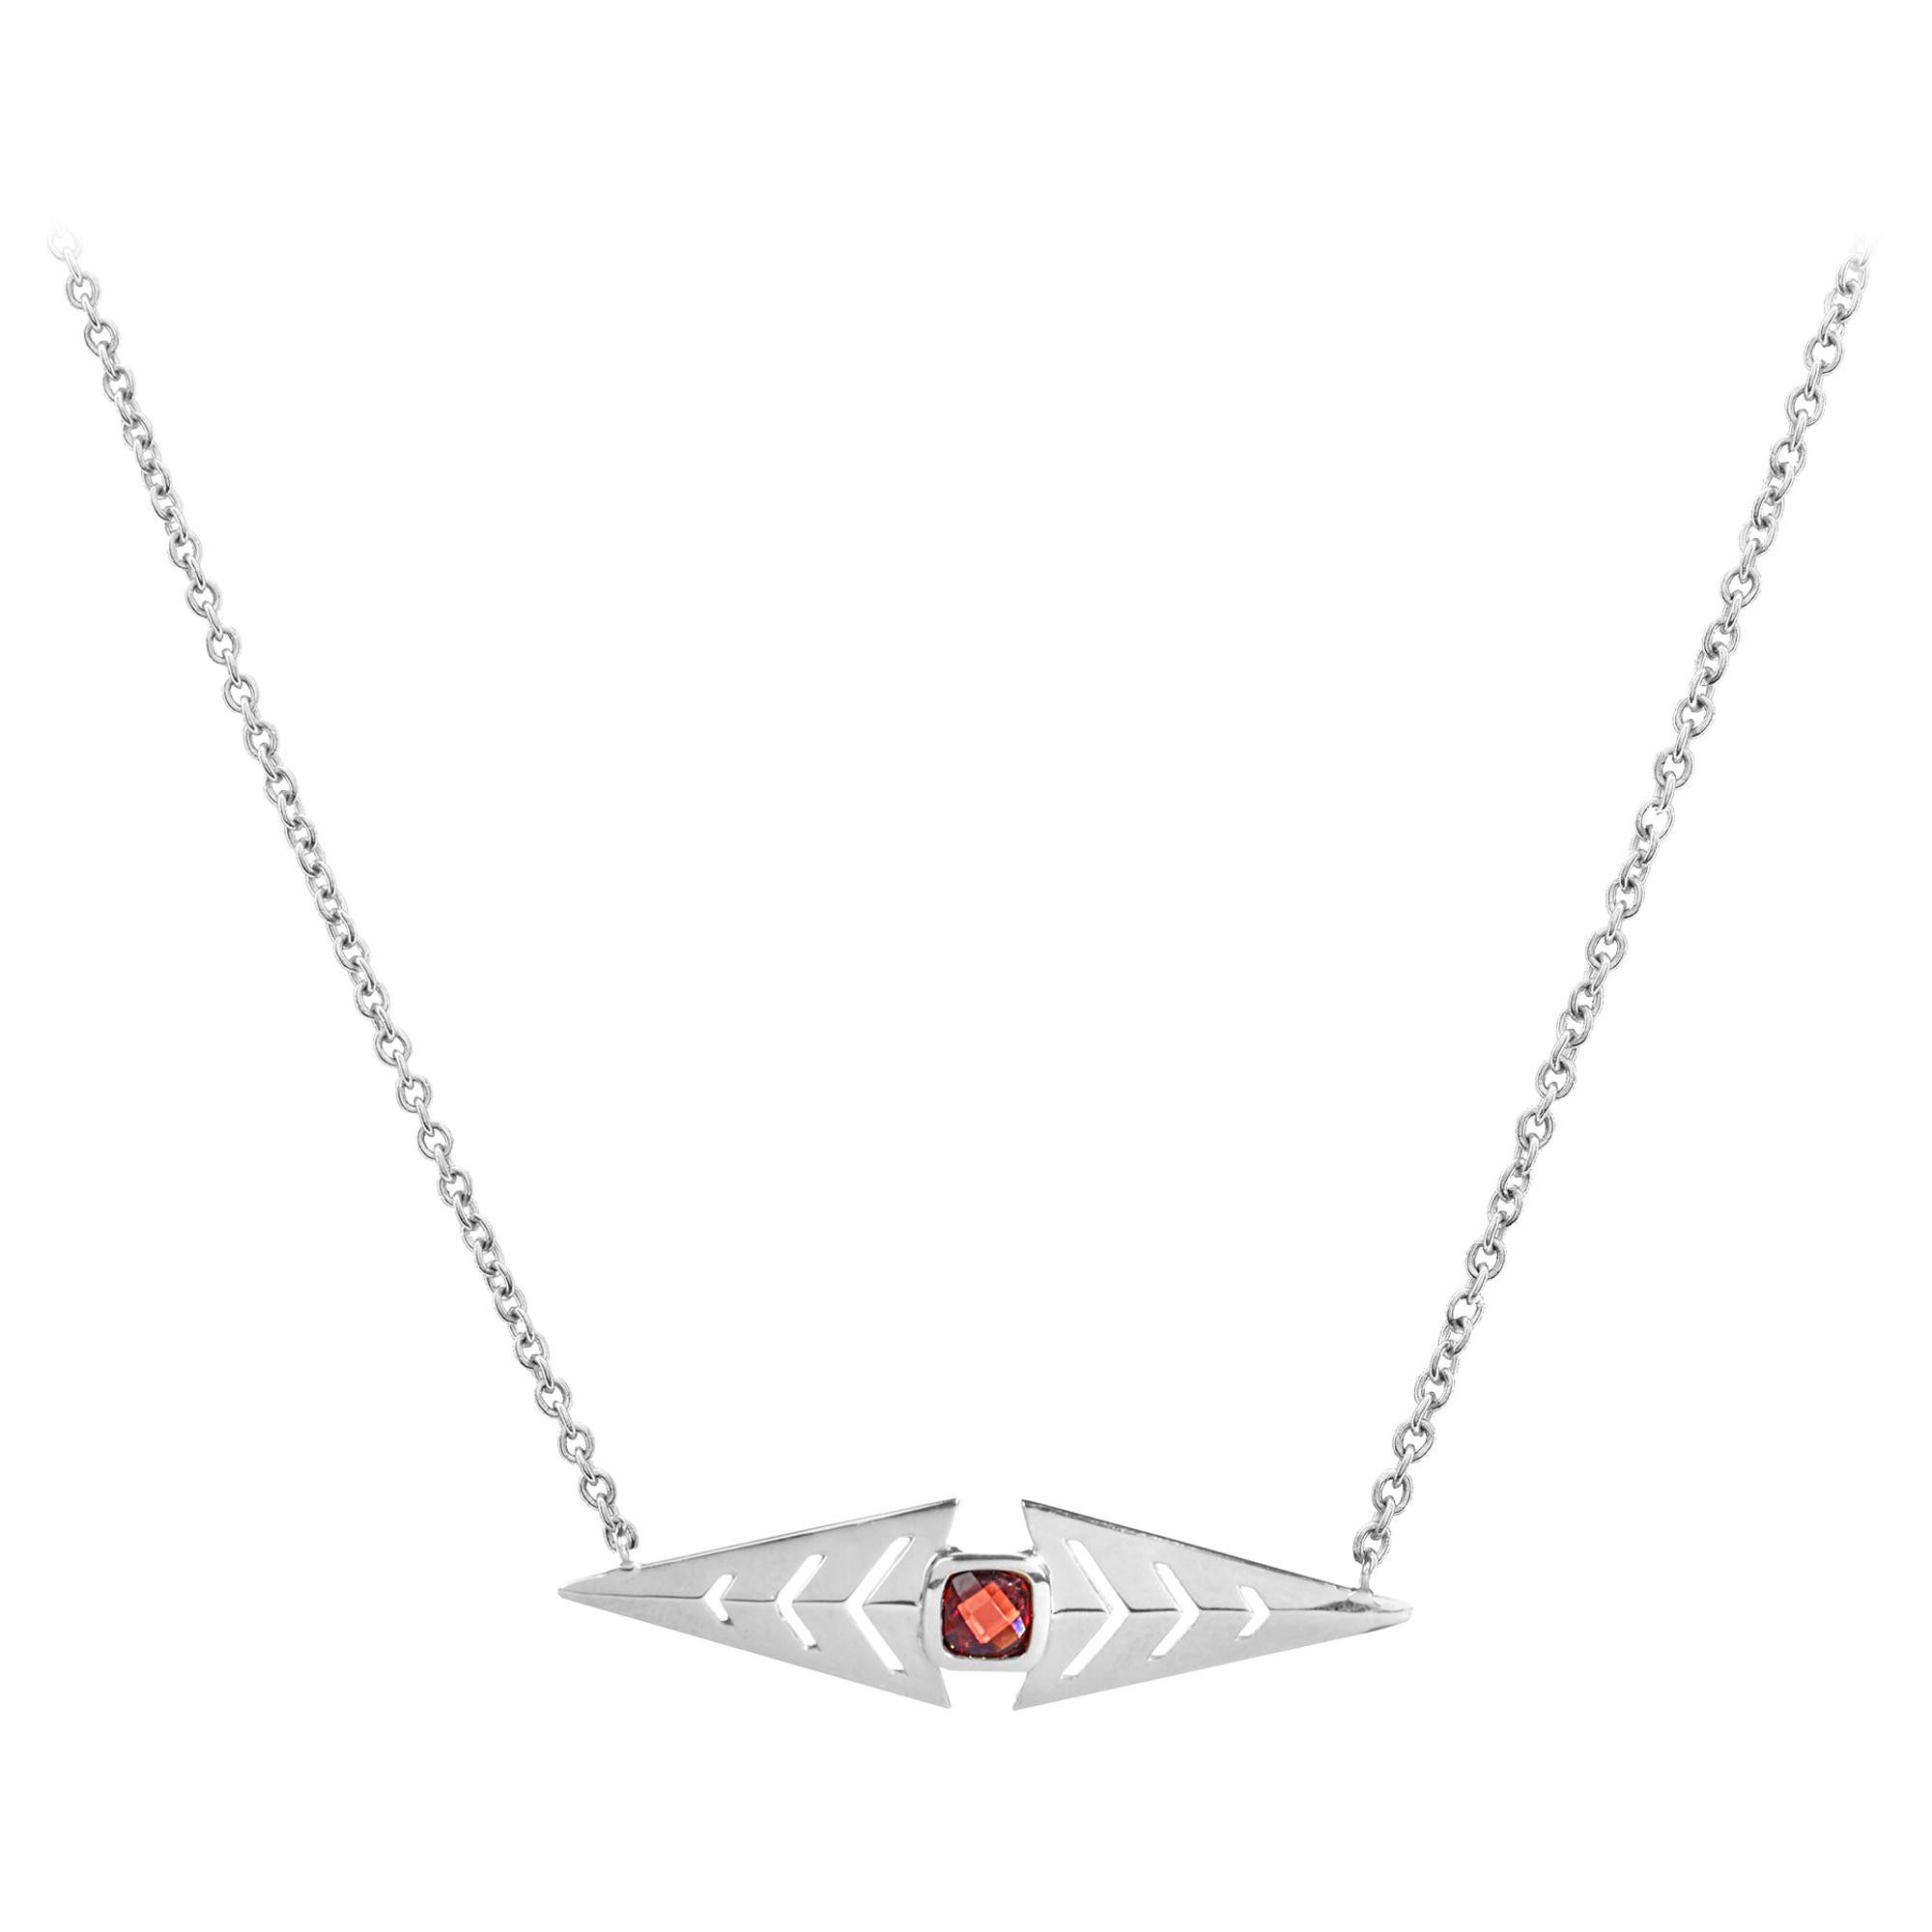 18 Karat White Gold with Garnet Cushion Cut Sign Necklace.Sustainable Fine Jewel For Sale